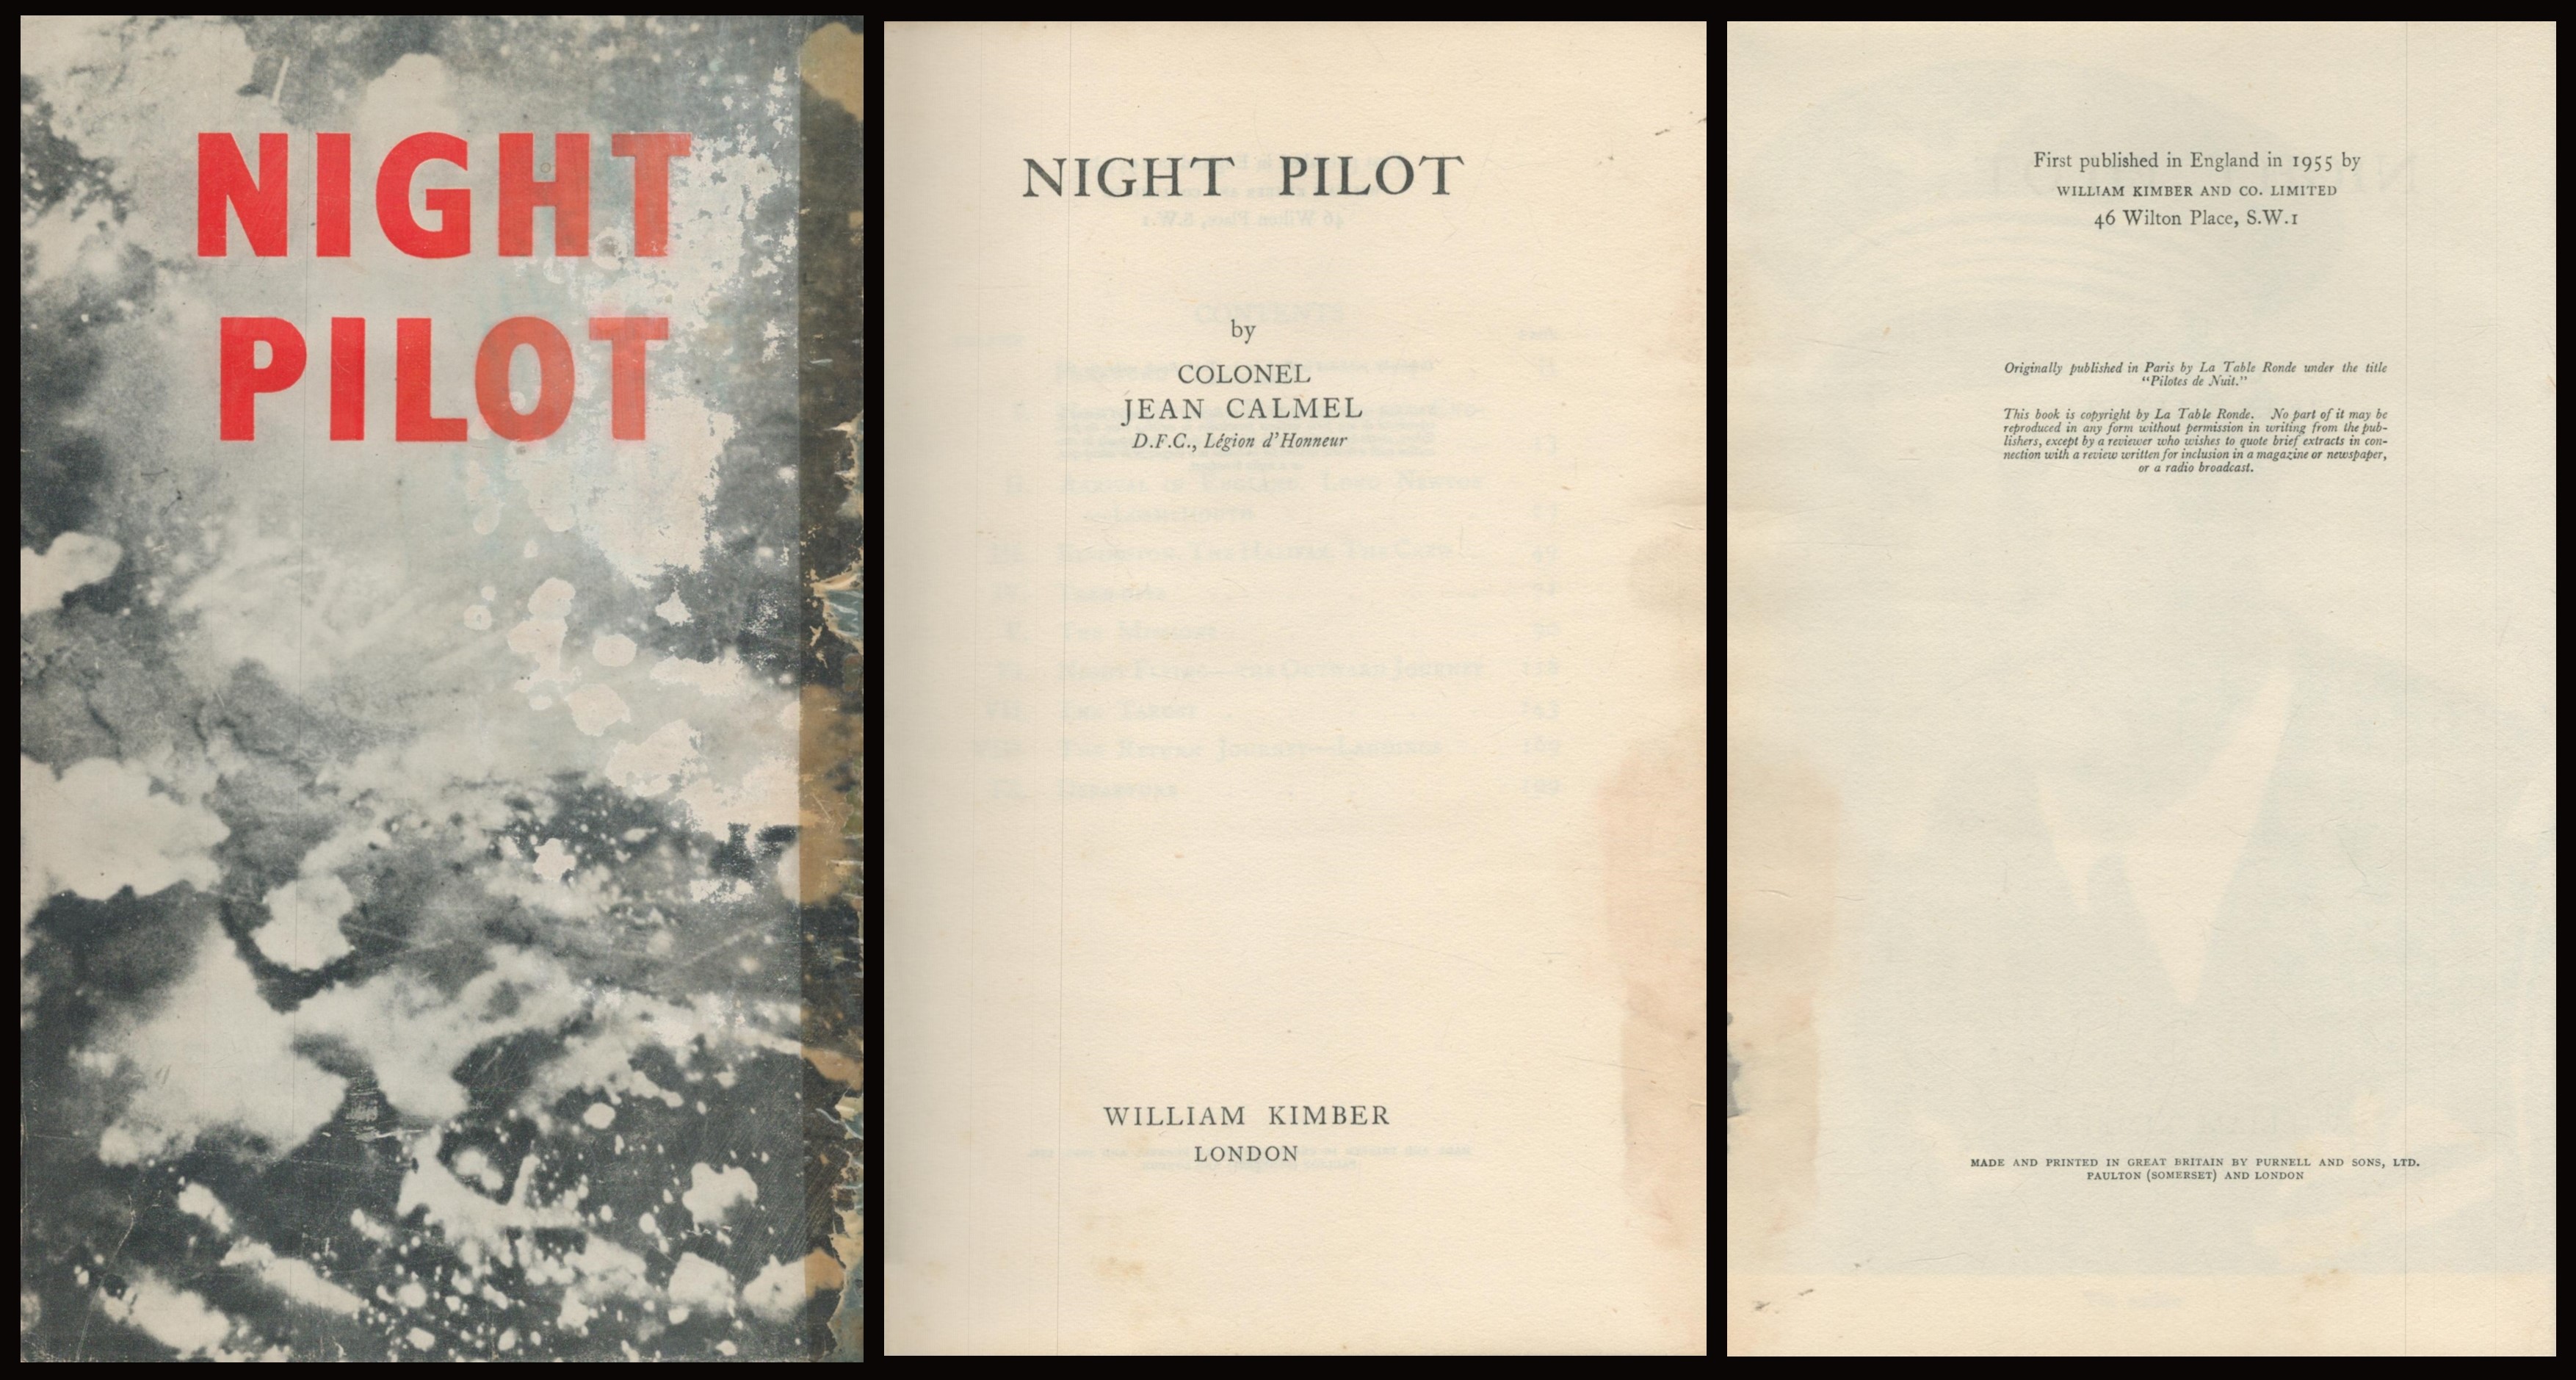 Night Pilot Rare 1955 First Edition Signed 22 WW2 RAF Bomber Command Veterans. Night Pilot" by - Image 2 of 2